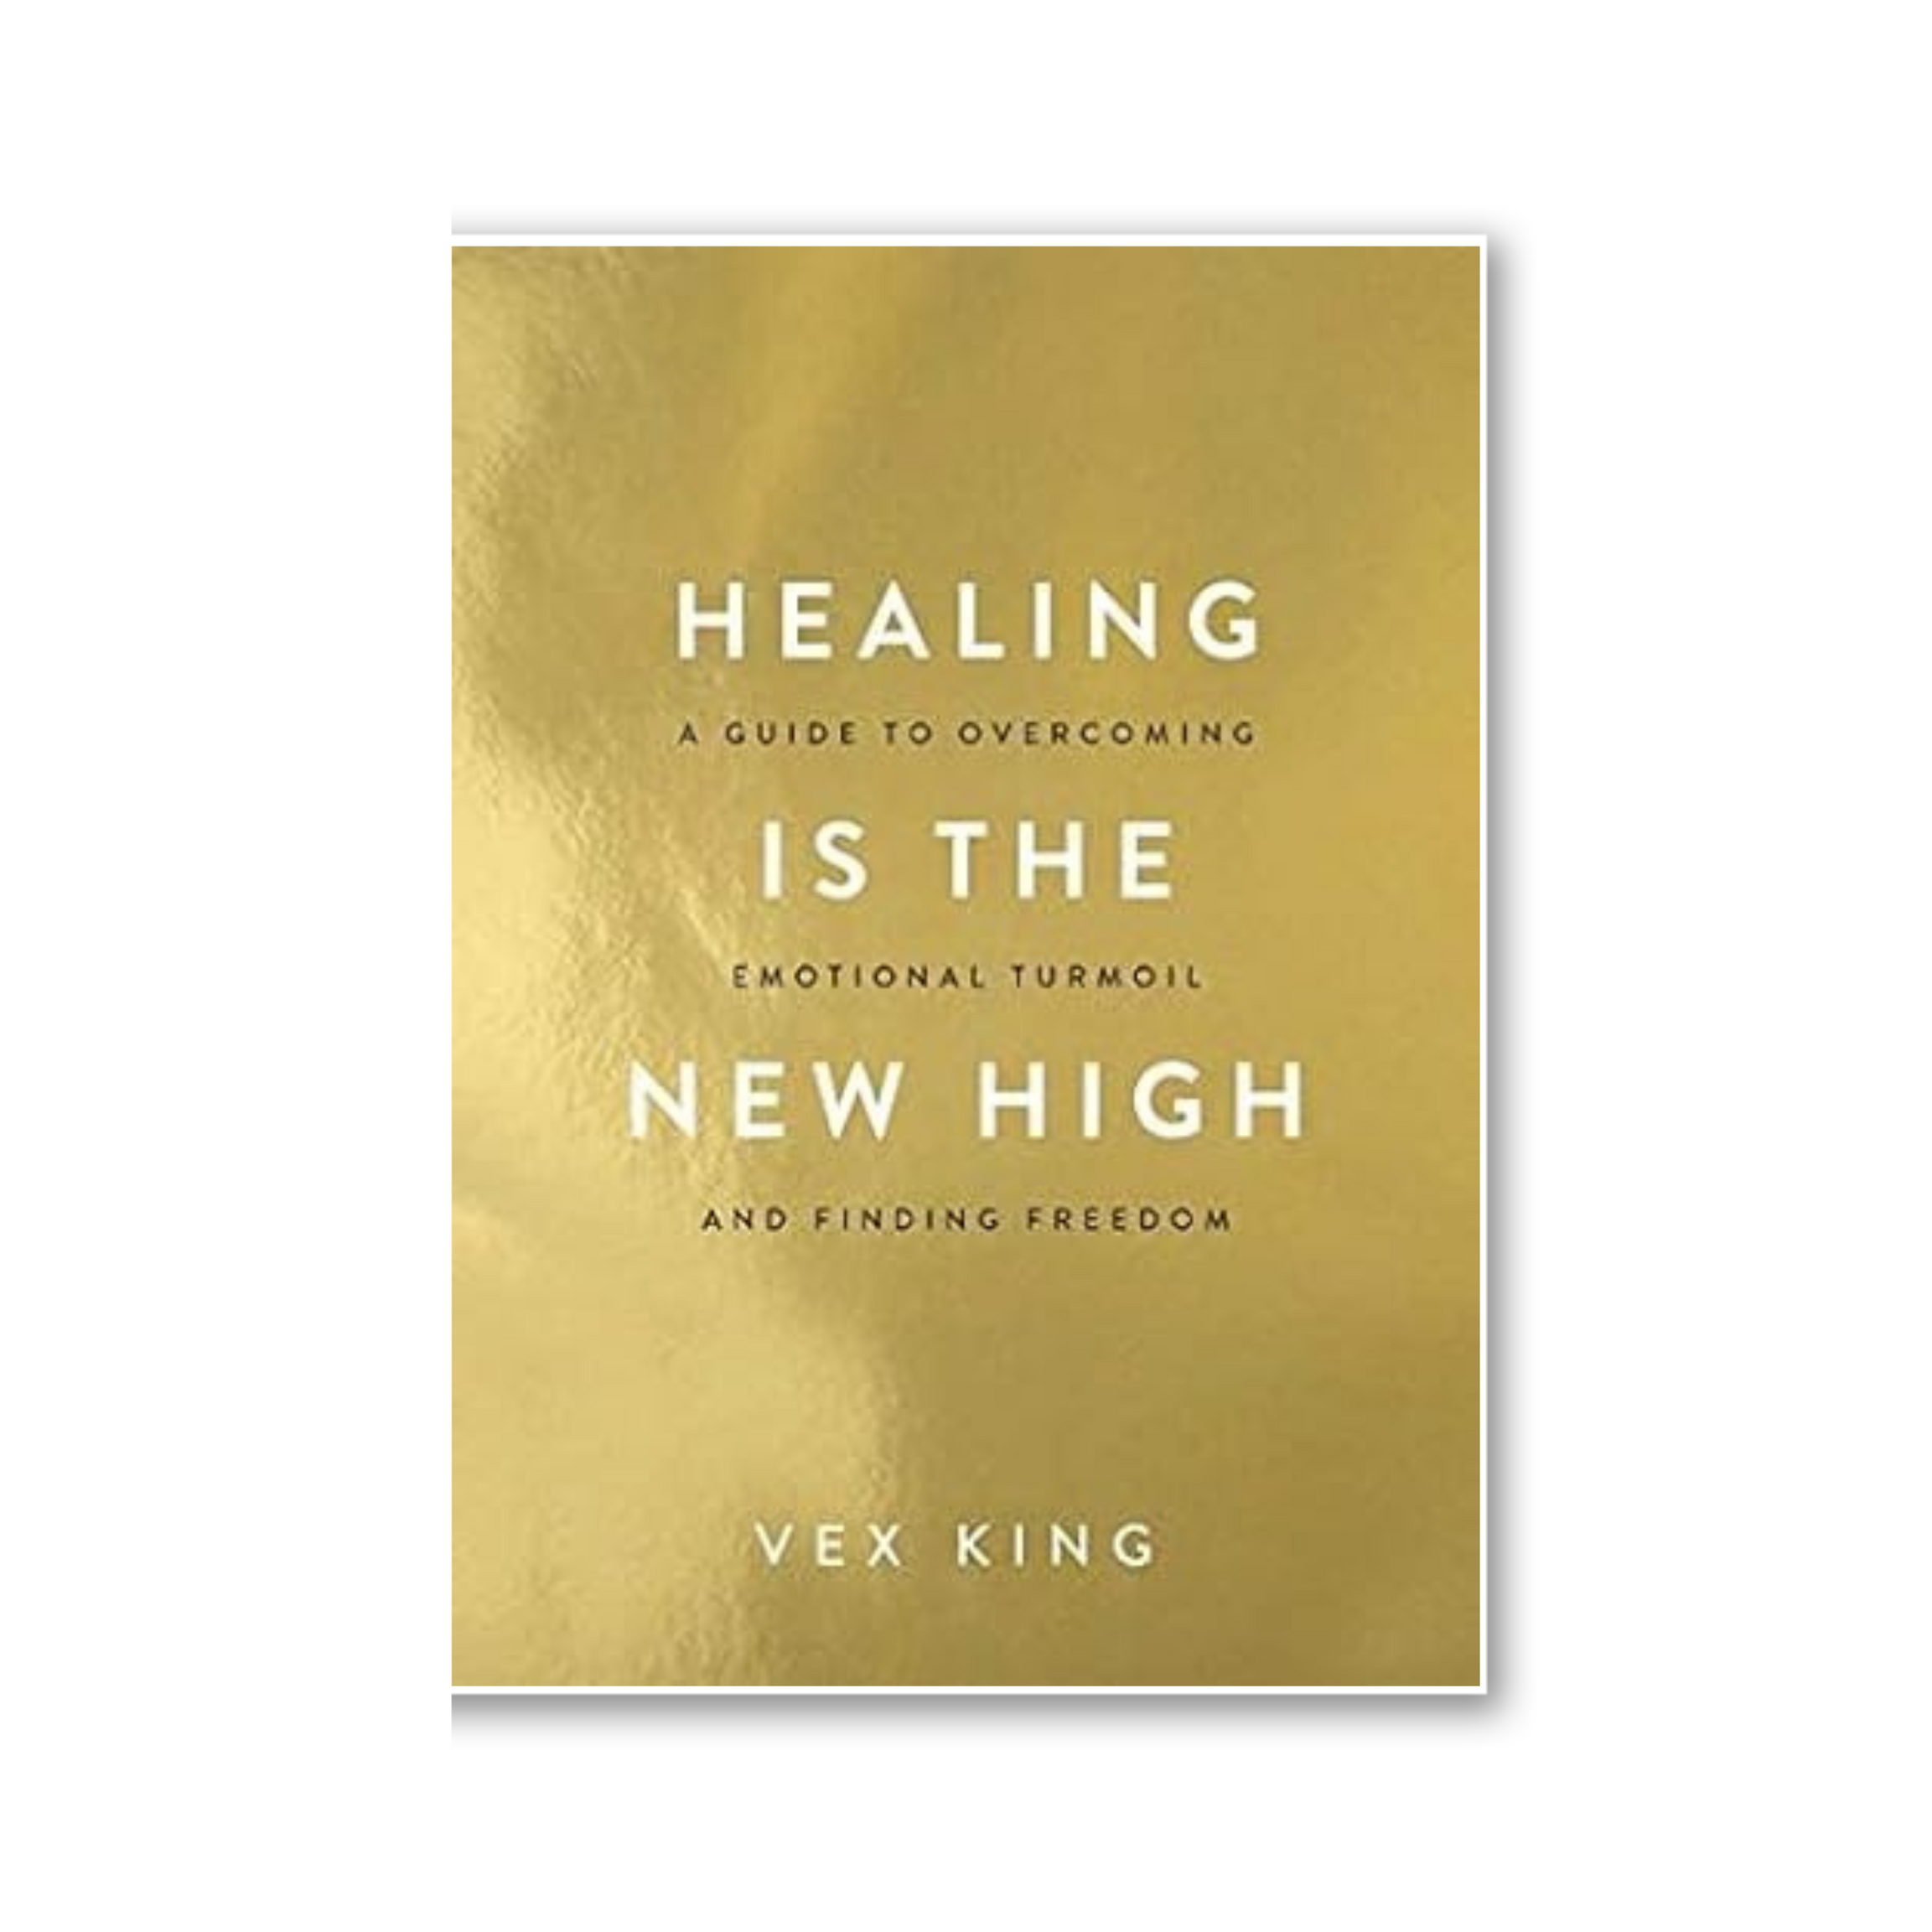 HEALING IS THE NEW HIGH